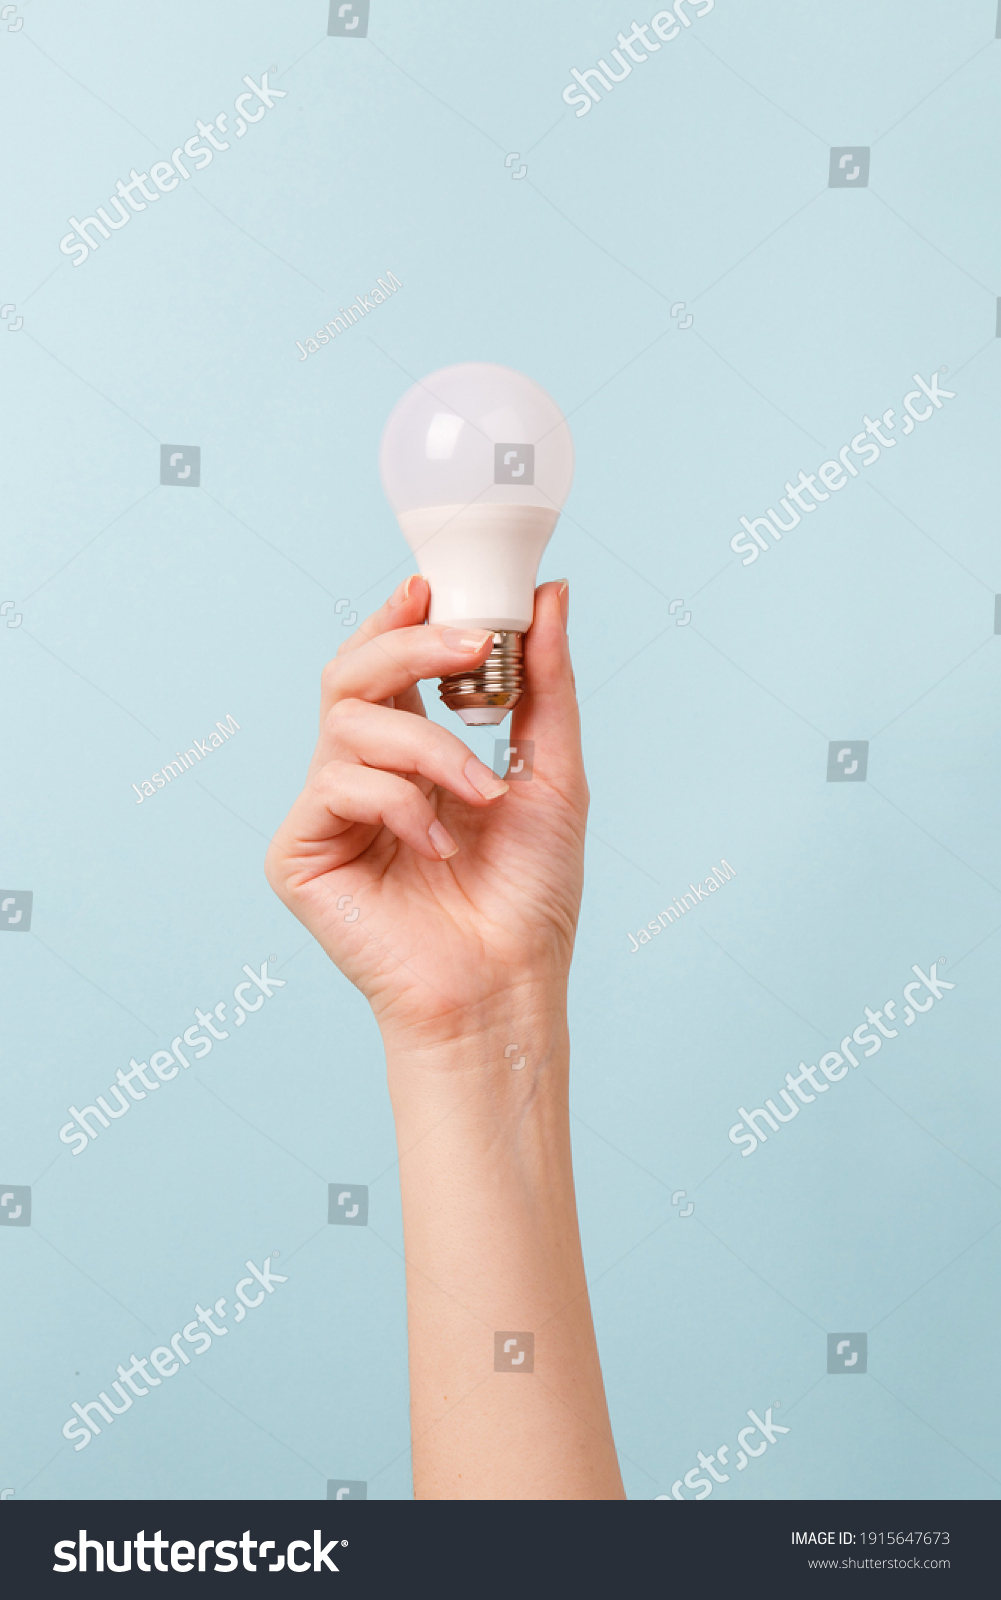 Hand holding a LED light bulb on blue background. Using economical and environmentally friendly light bulb concept. Idea. Energy saving lamp in woman's hand #1915647673